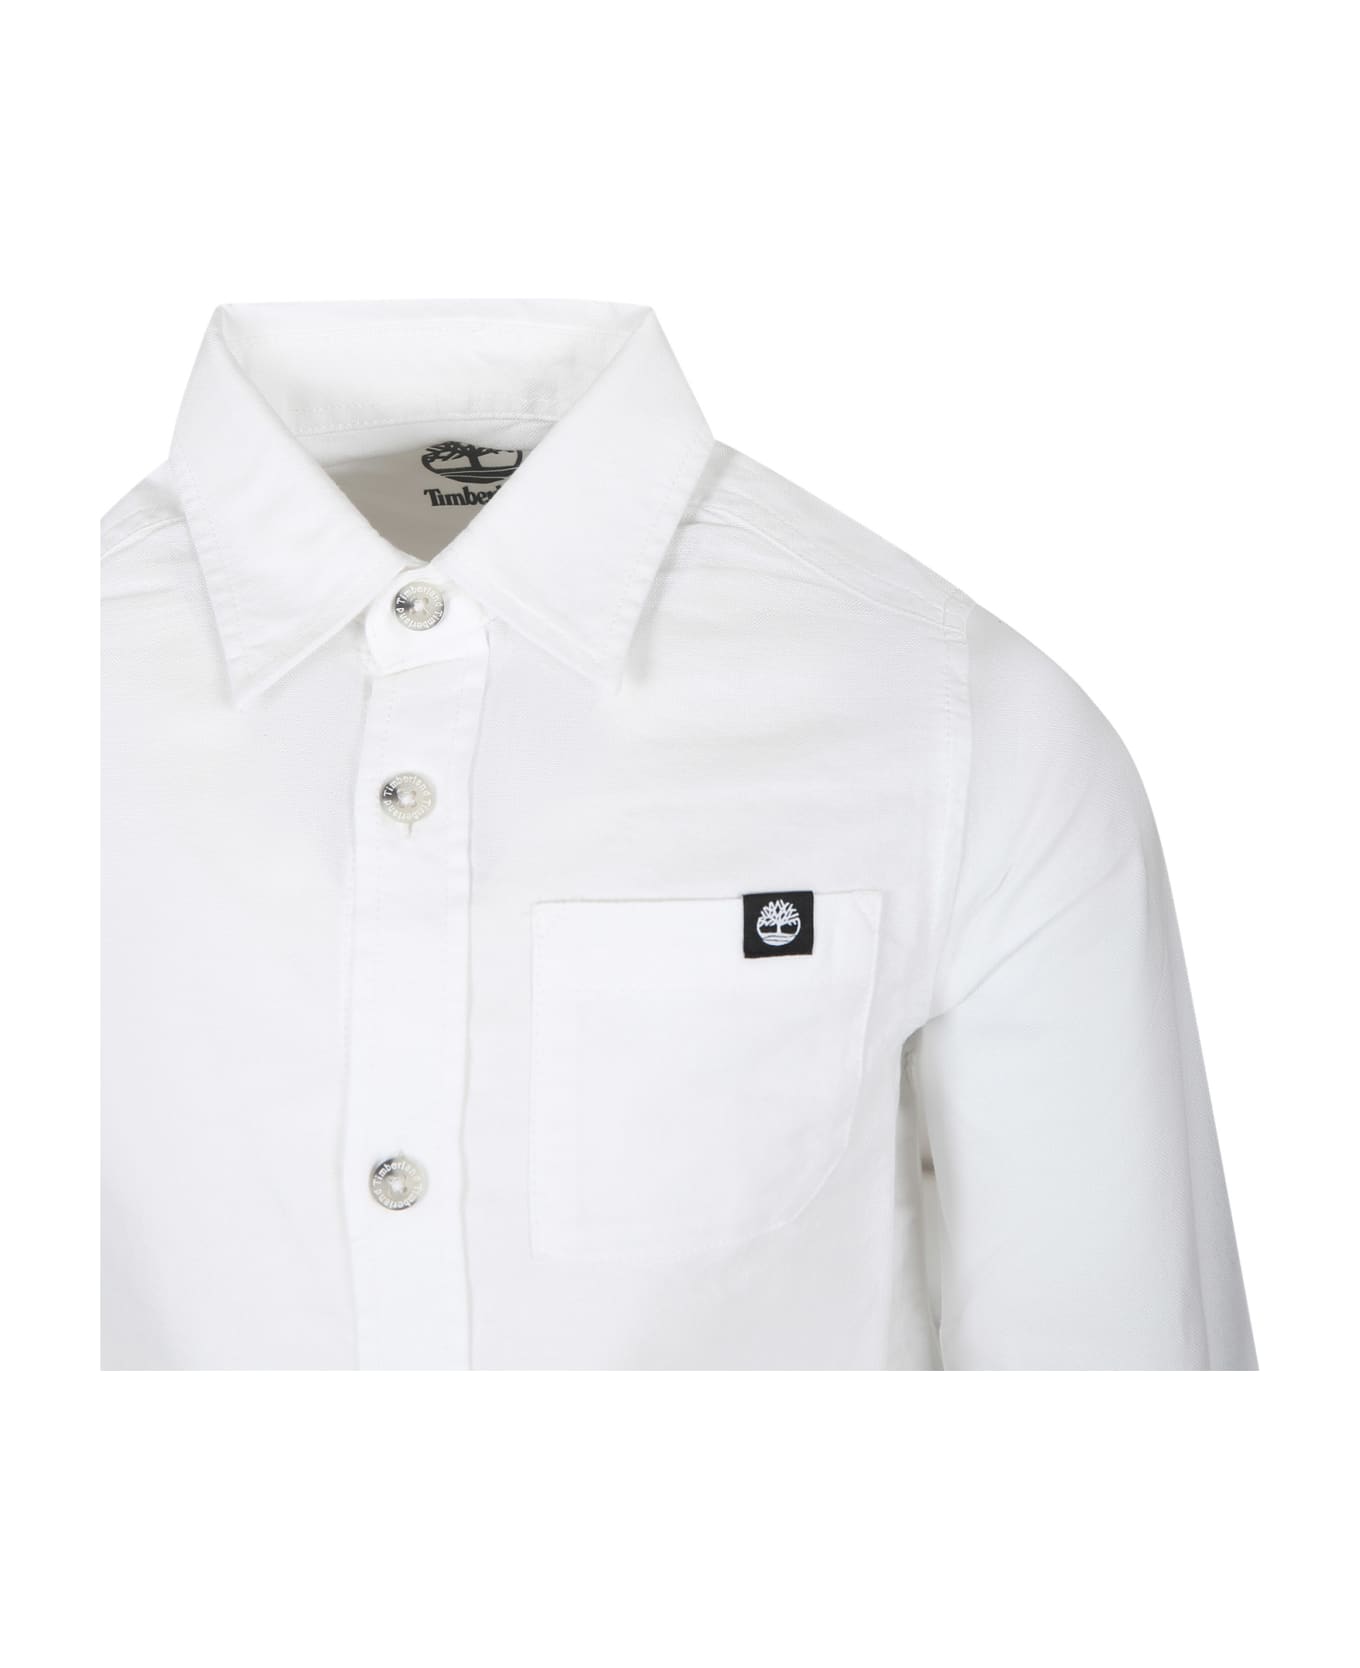 Timberland White Shirt For Boy With Logo - White